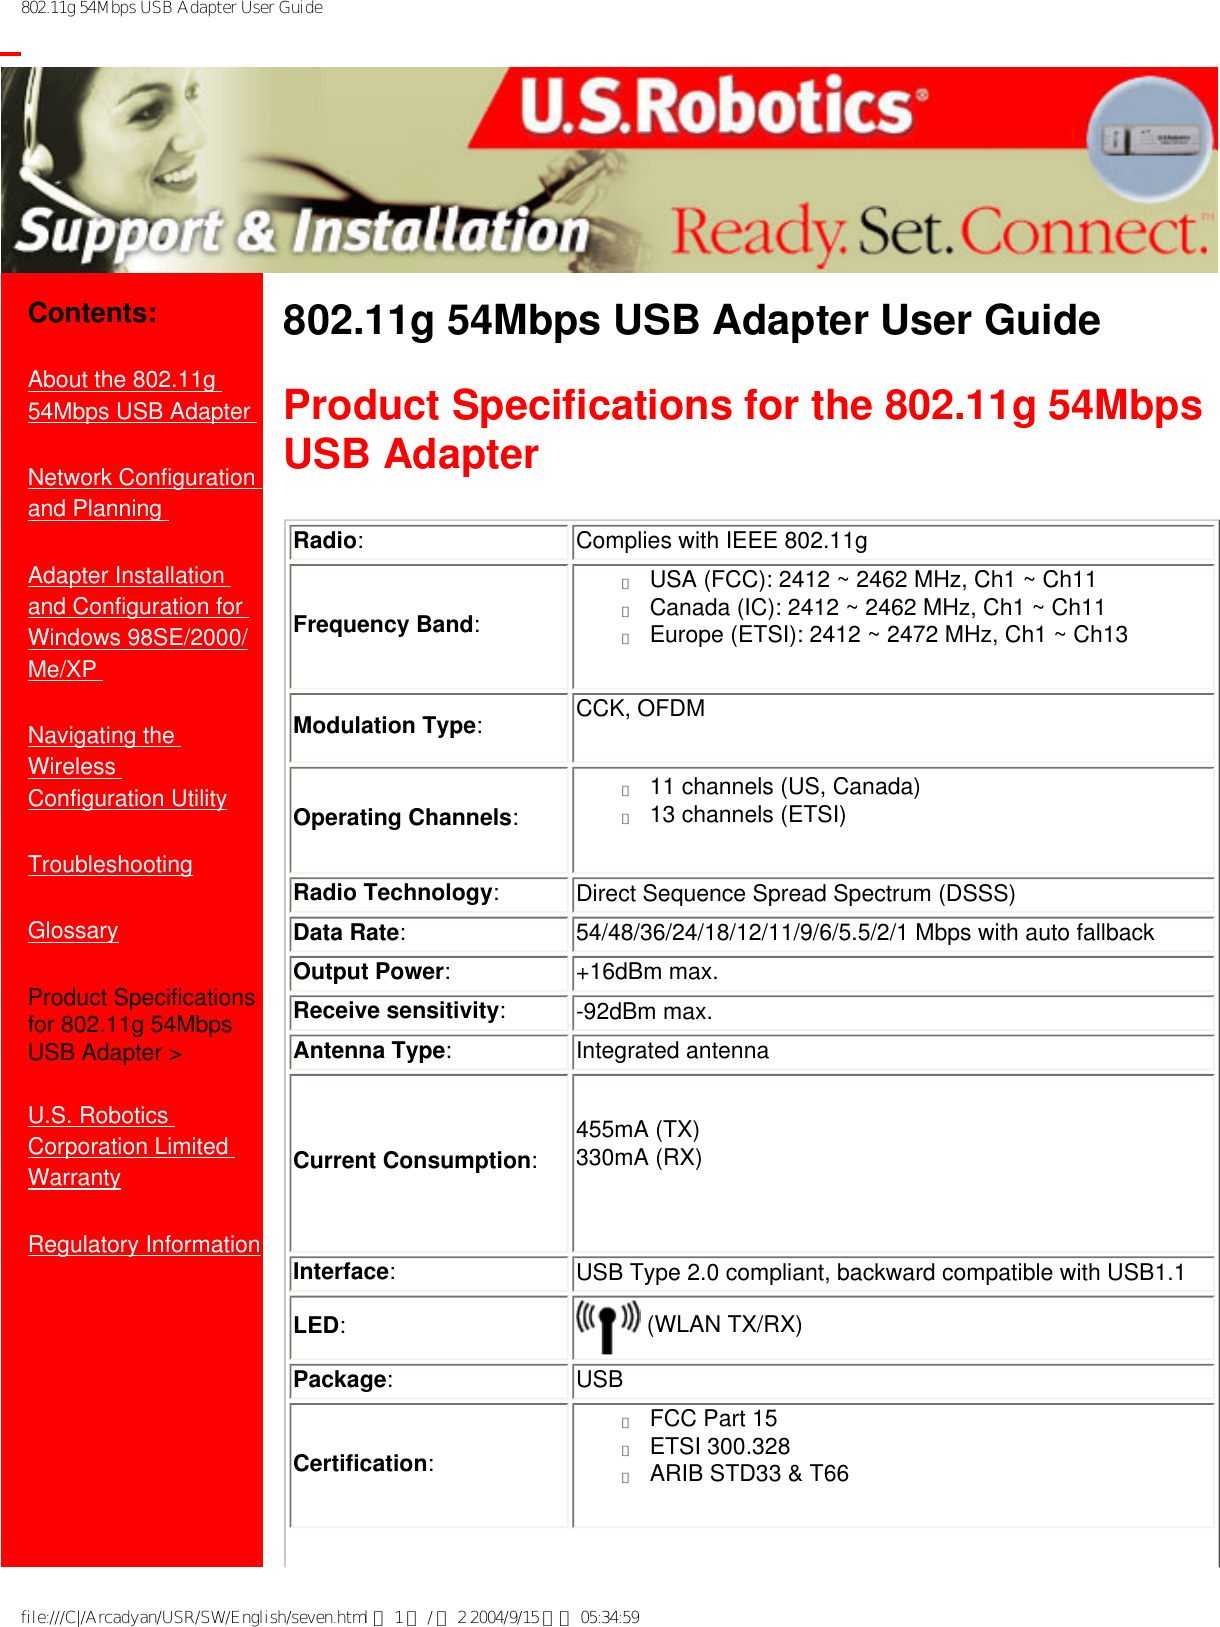 802.11g 54Mbps USB Adapter User Guide           Contents:About the 802.11g 54Mbps USB Adapter Network Configuration and Planning Adapter Installation and Configuration for Windows 98SE/2000/Me/XP Navigating the Wireless Configuration UtilityTroubleshootingGlossaryProduct Specifications for 802.11g 54Mbps USB Adapter &gt;U.S. Robotics Corporation Limited Warranty Regulatory Information802.11g 54Mbps USB Adapter User Guide Product Specifications for the 802.11g 54Mbps USB Adapter Radio:Complies with IEEE 802.11gFrequency Band:●     USA (FCC): 2412 ~ 2462 MHz, Ch1 ~ Ch11●     Canada (IC): 2412 ~ 2462 MHz, Ch1 ~ Ch11●     Europe (ETSI): 2412 ~ 2472 MHz, Ch1 ~ Ch13Modulation Type:CCK, OFDMOperating Channels:●     11 channels (US, Canada)●     13 channels (ETSI)Radio Technology:Direct Sequence Spread Spectrum (DSSS)Data Rate:54/48/36/24/18/12/11/9/6/5.5/2/1 Mbps with auto fallback Output Power:+16dBm max.Receive sensitivity:-92dBm max.Antenna Type:Integrated antennaCurrent Consumption:455mA (TX)330mA (RX)Interface:  USB Type 2.0 compliant, backward compatible with USB1.1LED: (WLAN TX/RX) Package:USBCertification:●     FCC Part 15●     ETSI 300.328●     ARIB STD33 &amp; T66file:///C|/Arcadyan/USR/SW/English/seven.html 第 1 頁 / 共 2 2004/9/15 下午 05:34:59